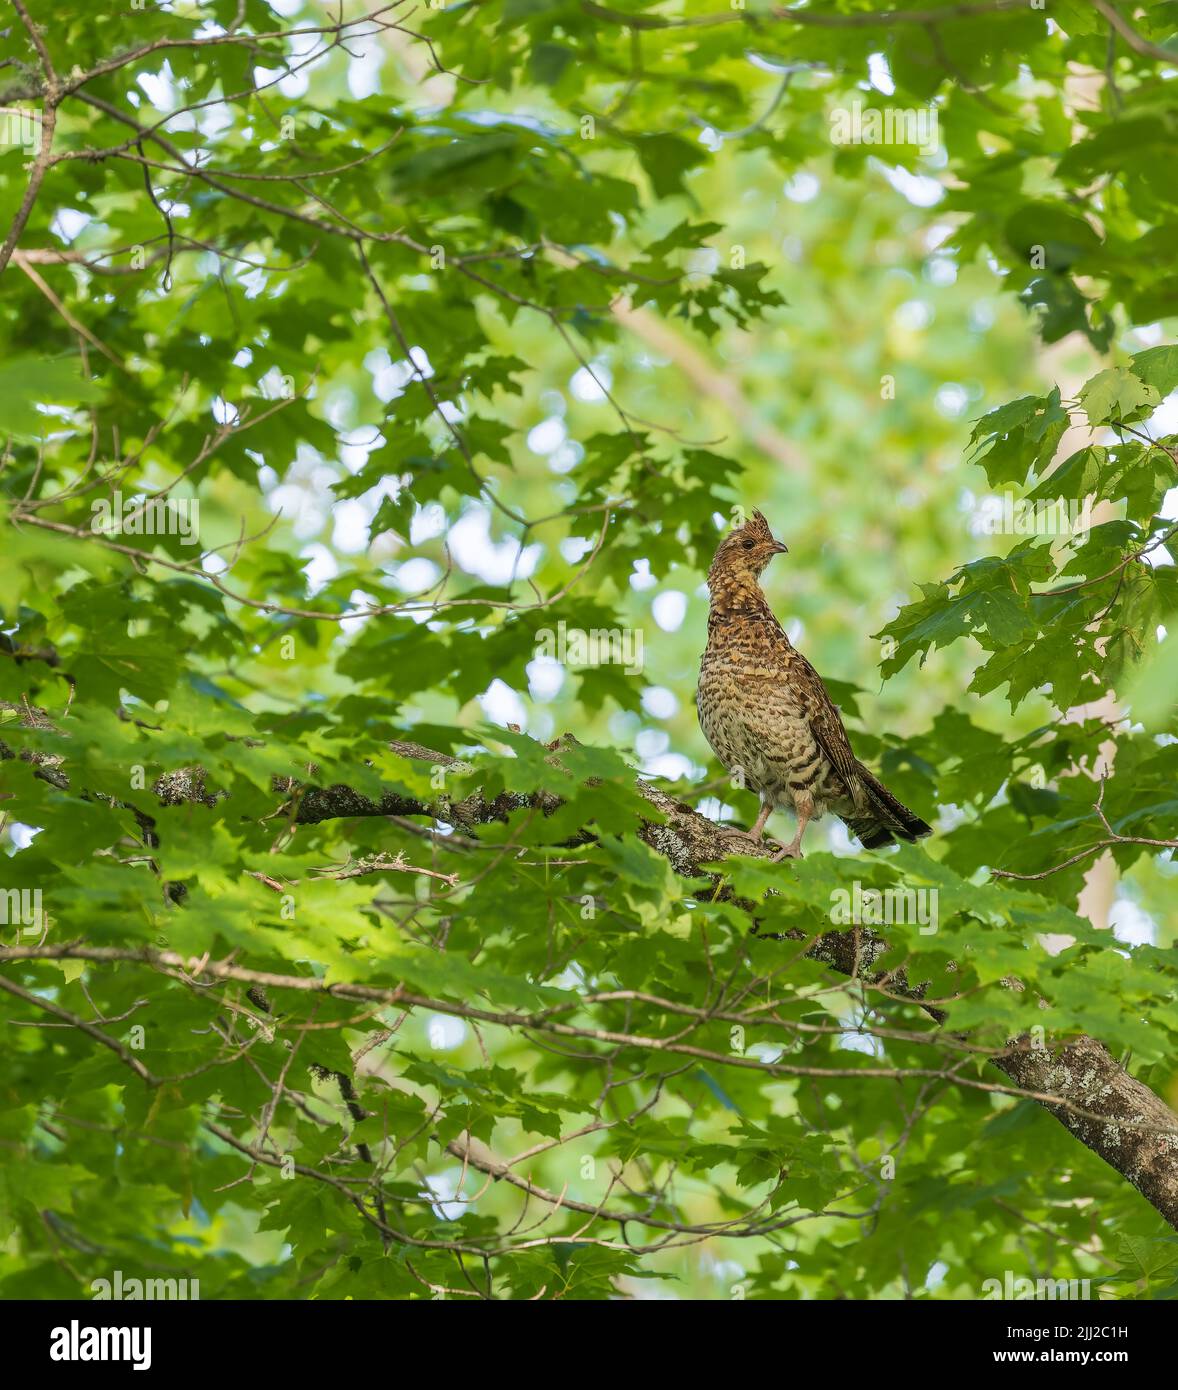 Ruffed grouse in northern Wisconsin. Stock Photo